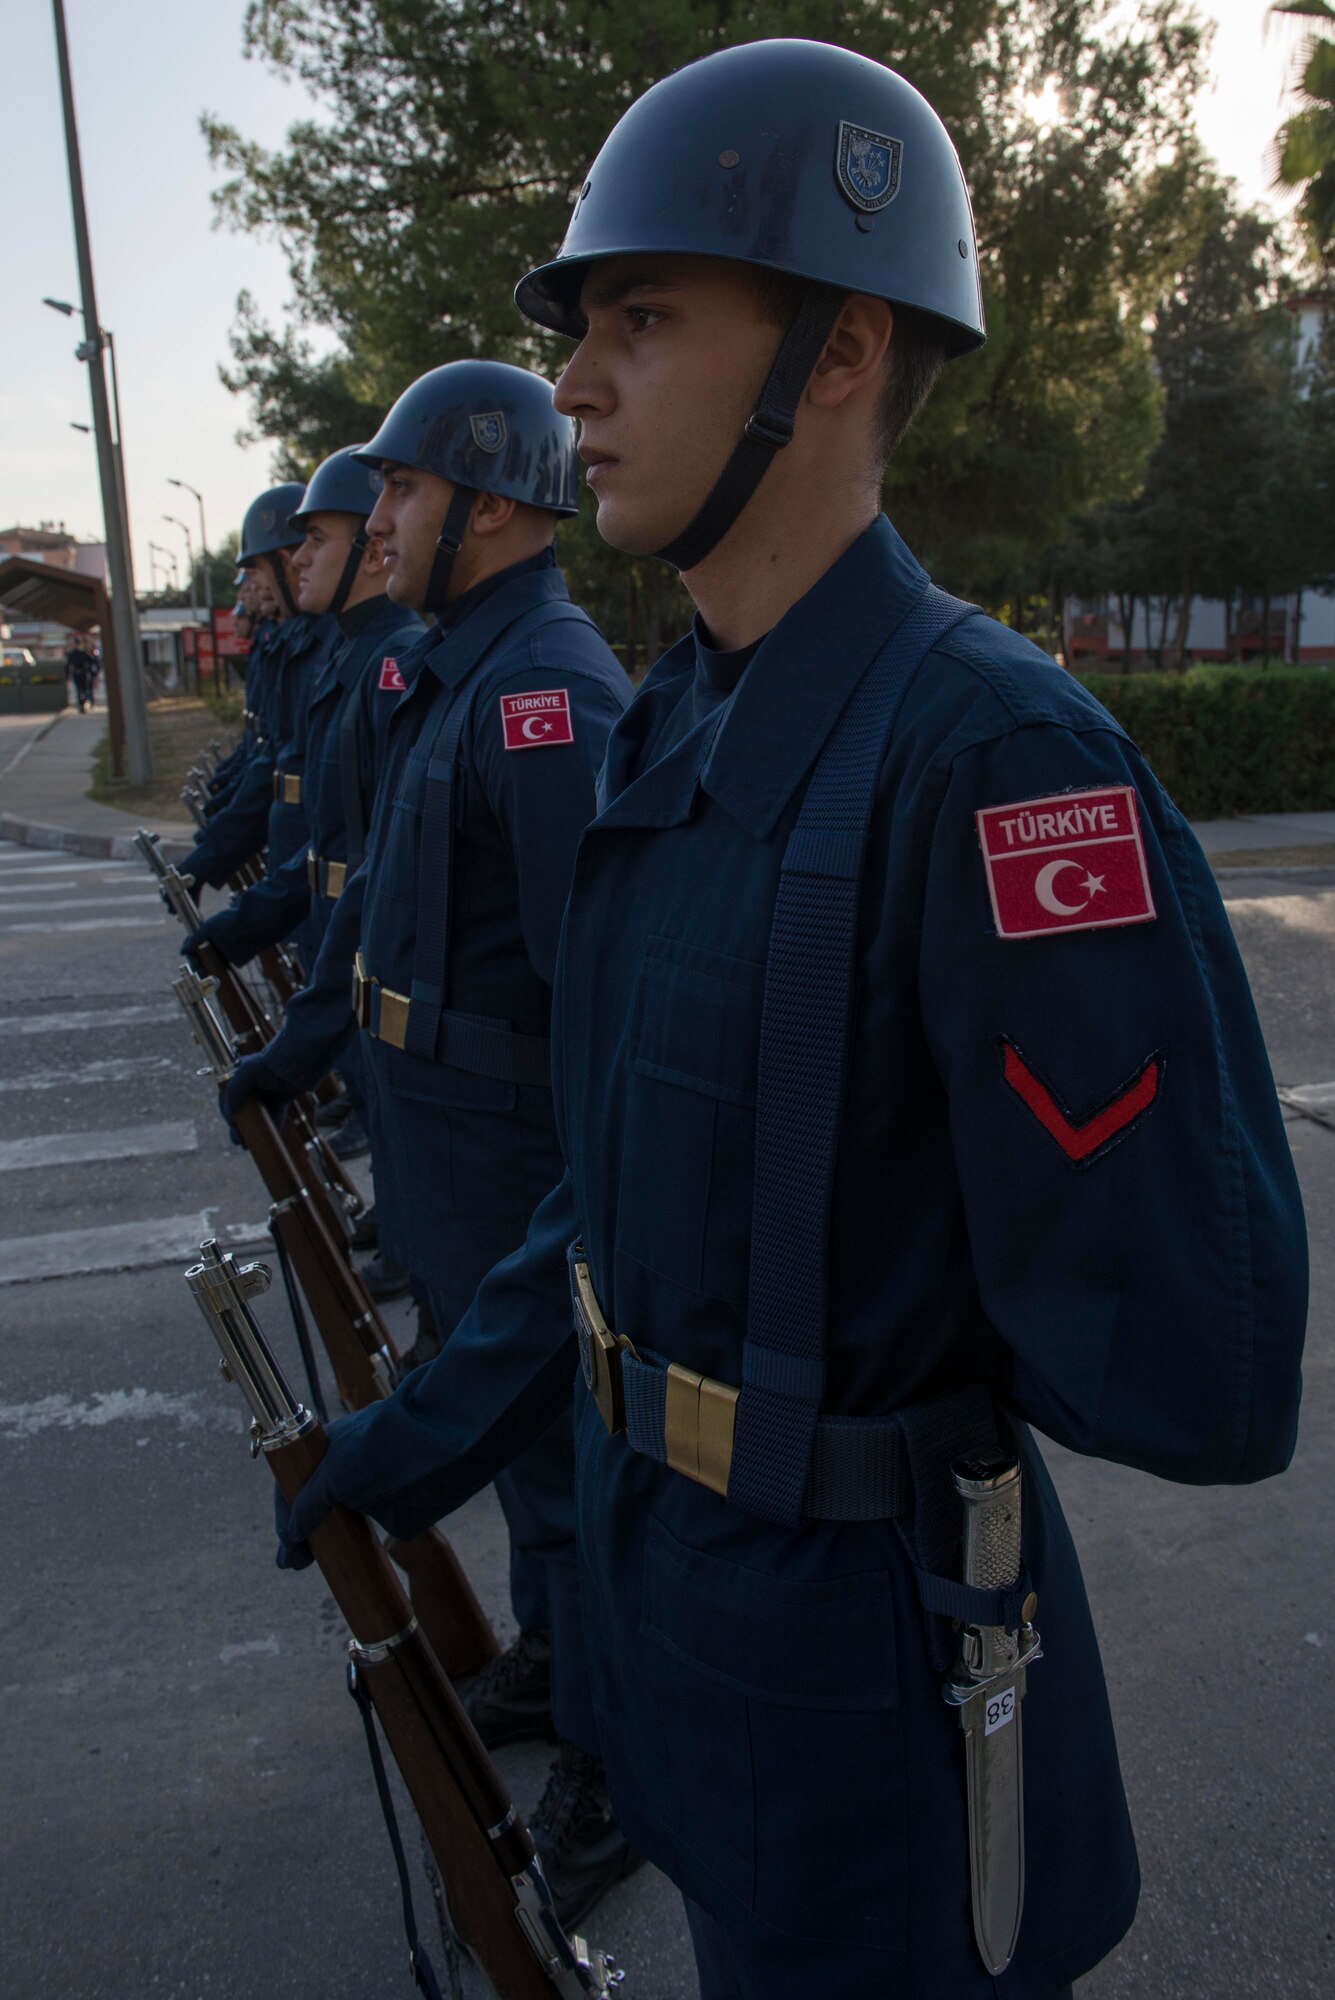 Members of the 10th Tanker Base Command honor guard stand at parade rest during a memorial ceremony for Mustafa Kemal Ataturk Nov. 10, 2016, at Incirlik Air Base, Turkey. The Turkish pay tribute to Ataturk with nation-wide memorial services Nov. 10, annually. (U.S. Air Force photo by Senior Airman John Nieves Camacho)